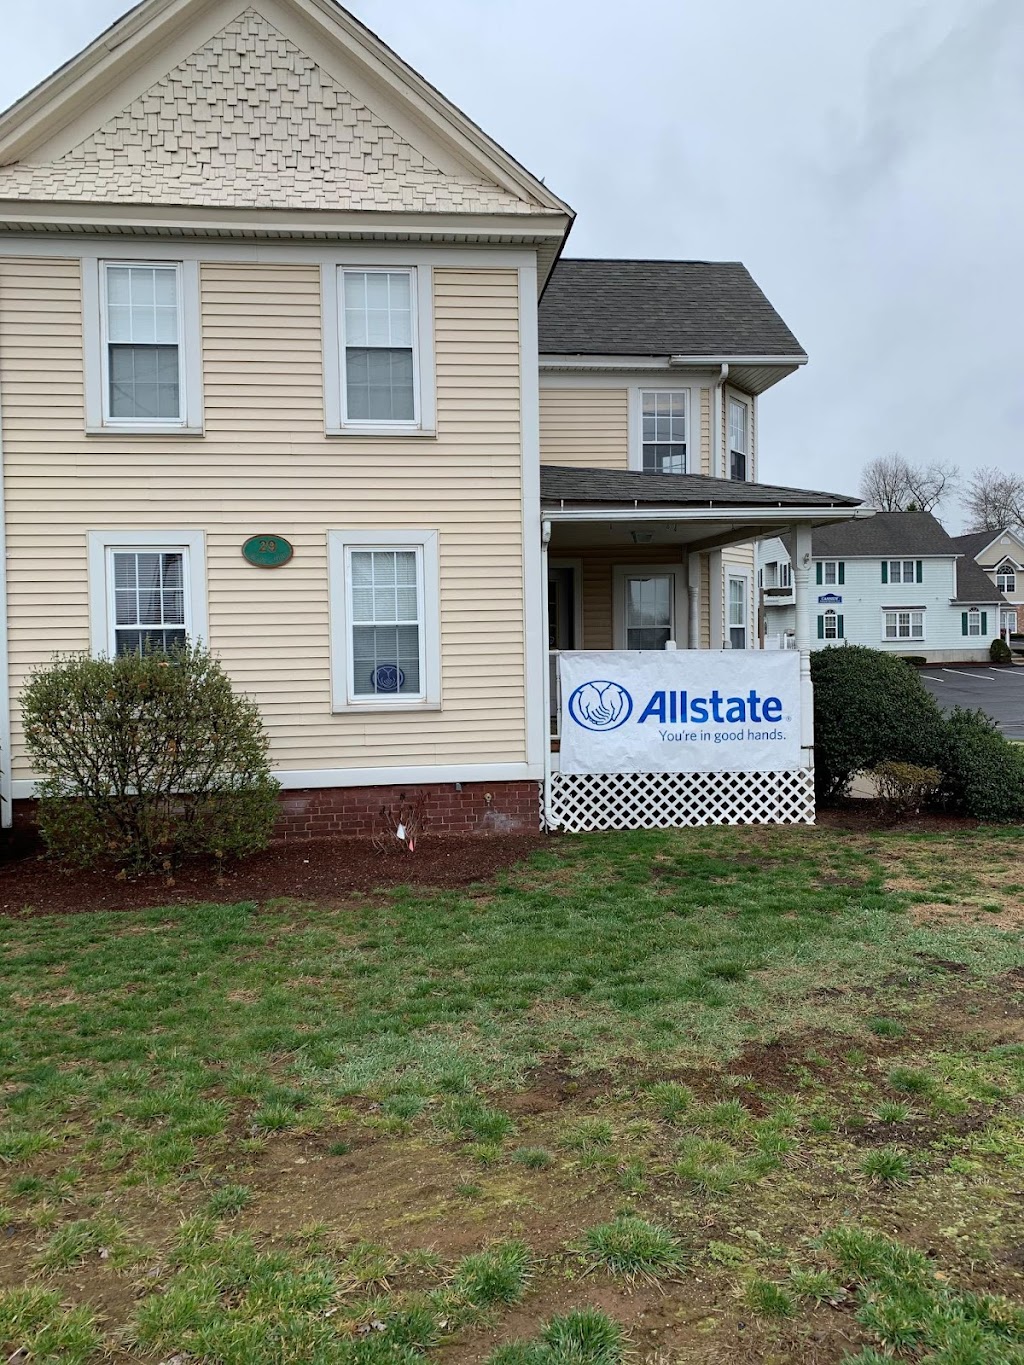 Lyle Govoni: Allstate Insurance | 29 S Main St Unit B, East Windsor, CT 06088 | Phone: (860) 688-3000